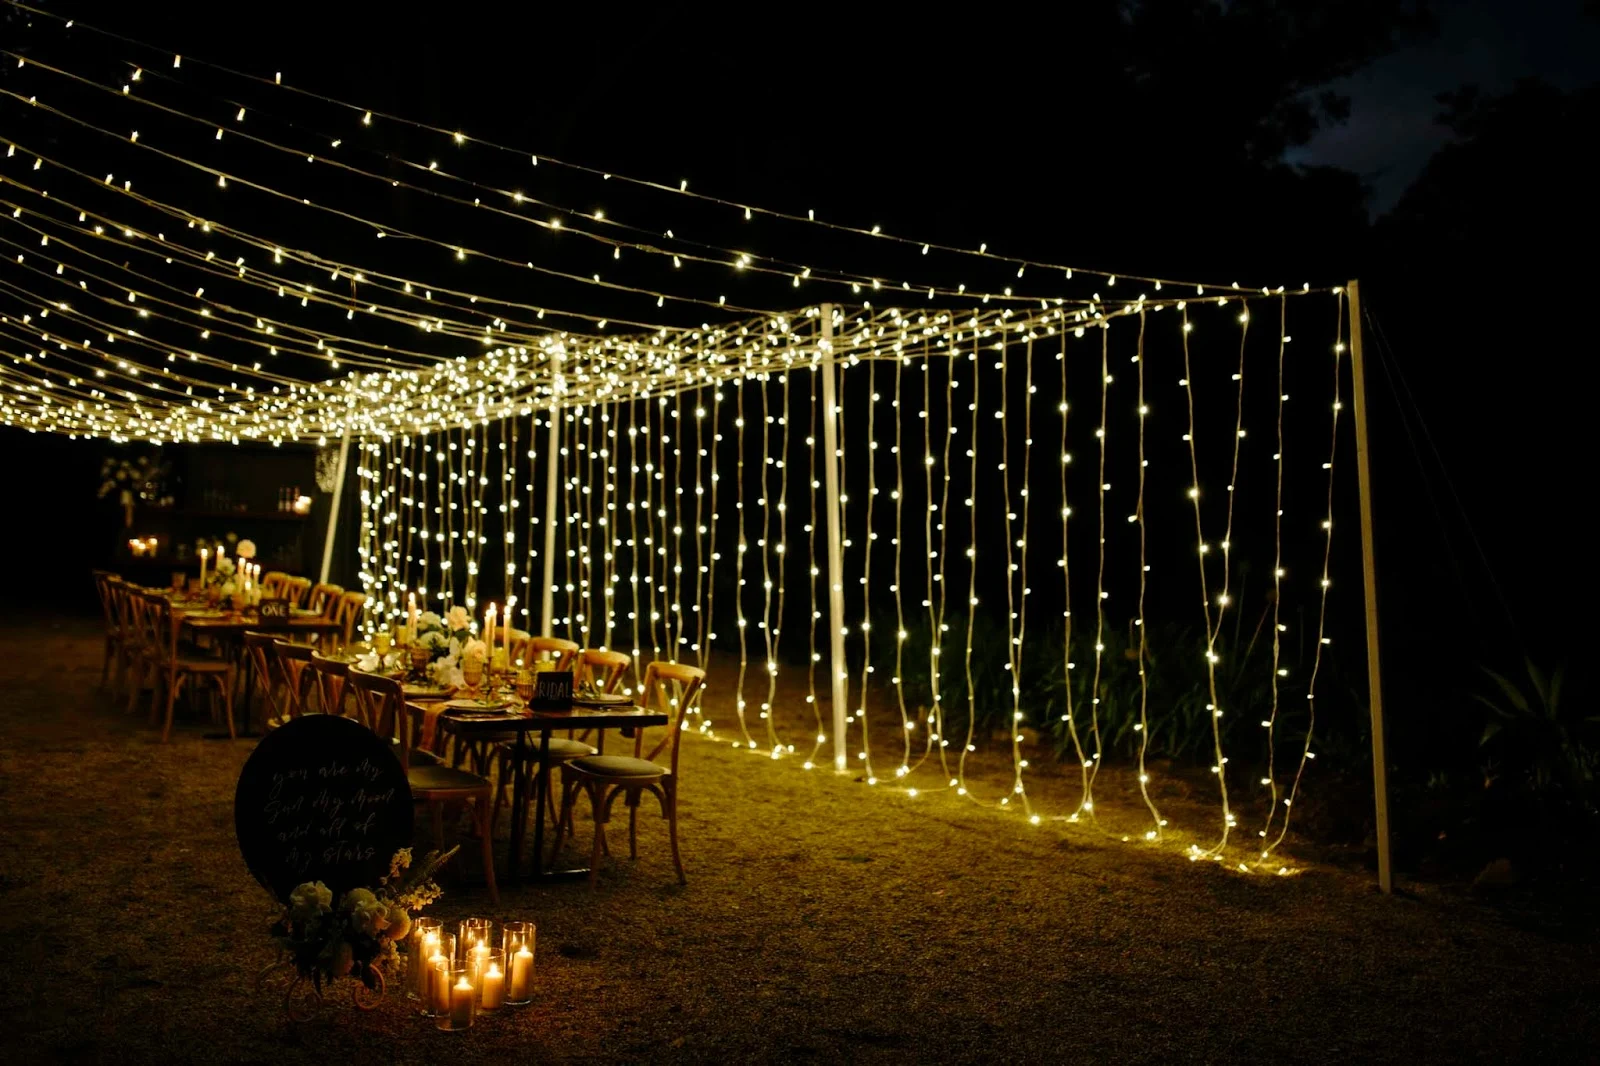 jennifer burch photography to the aisle australia outdoor weddings fairy light canopy floral design styling